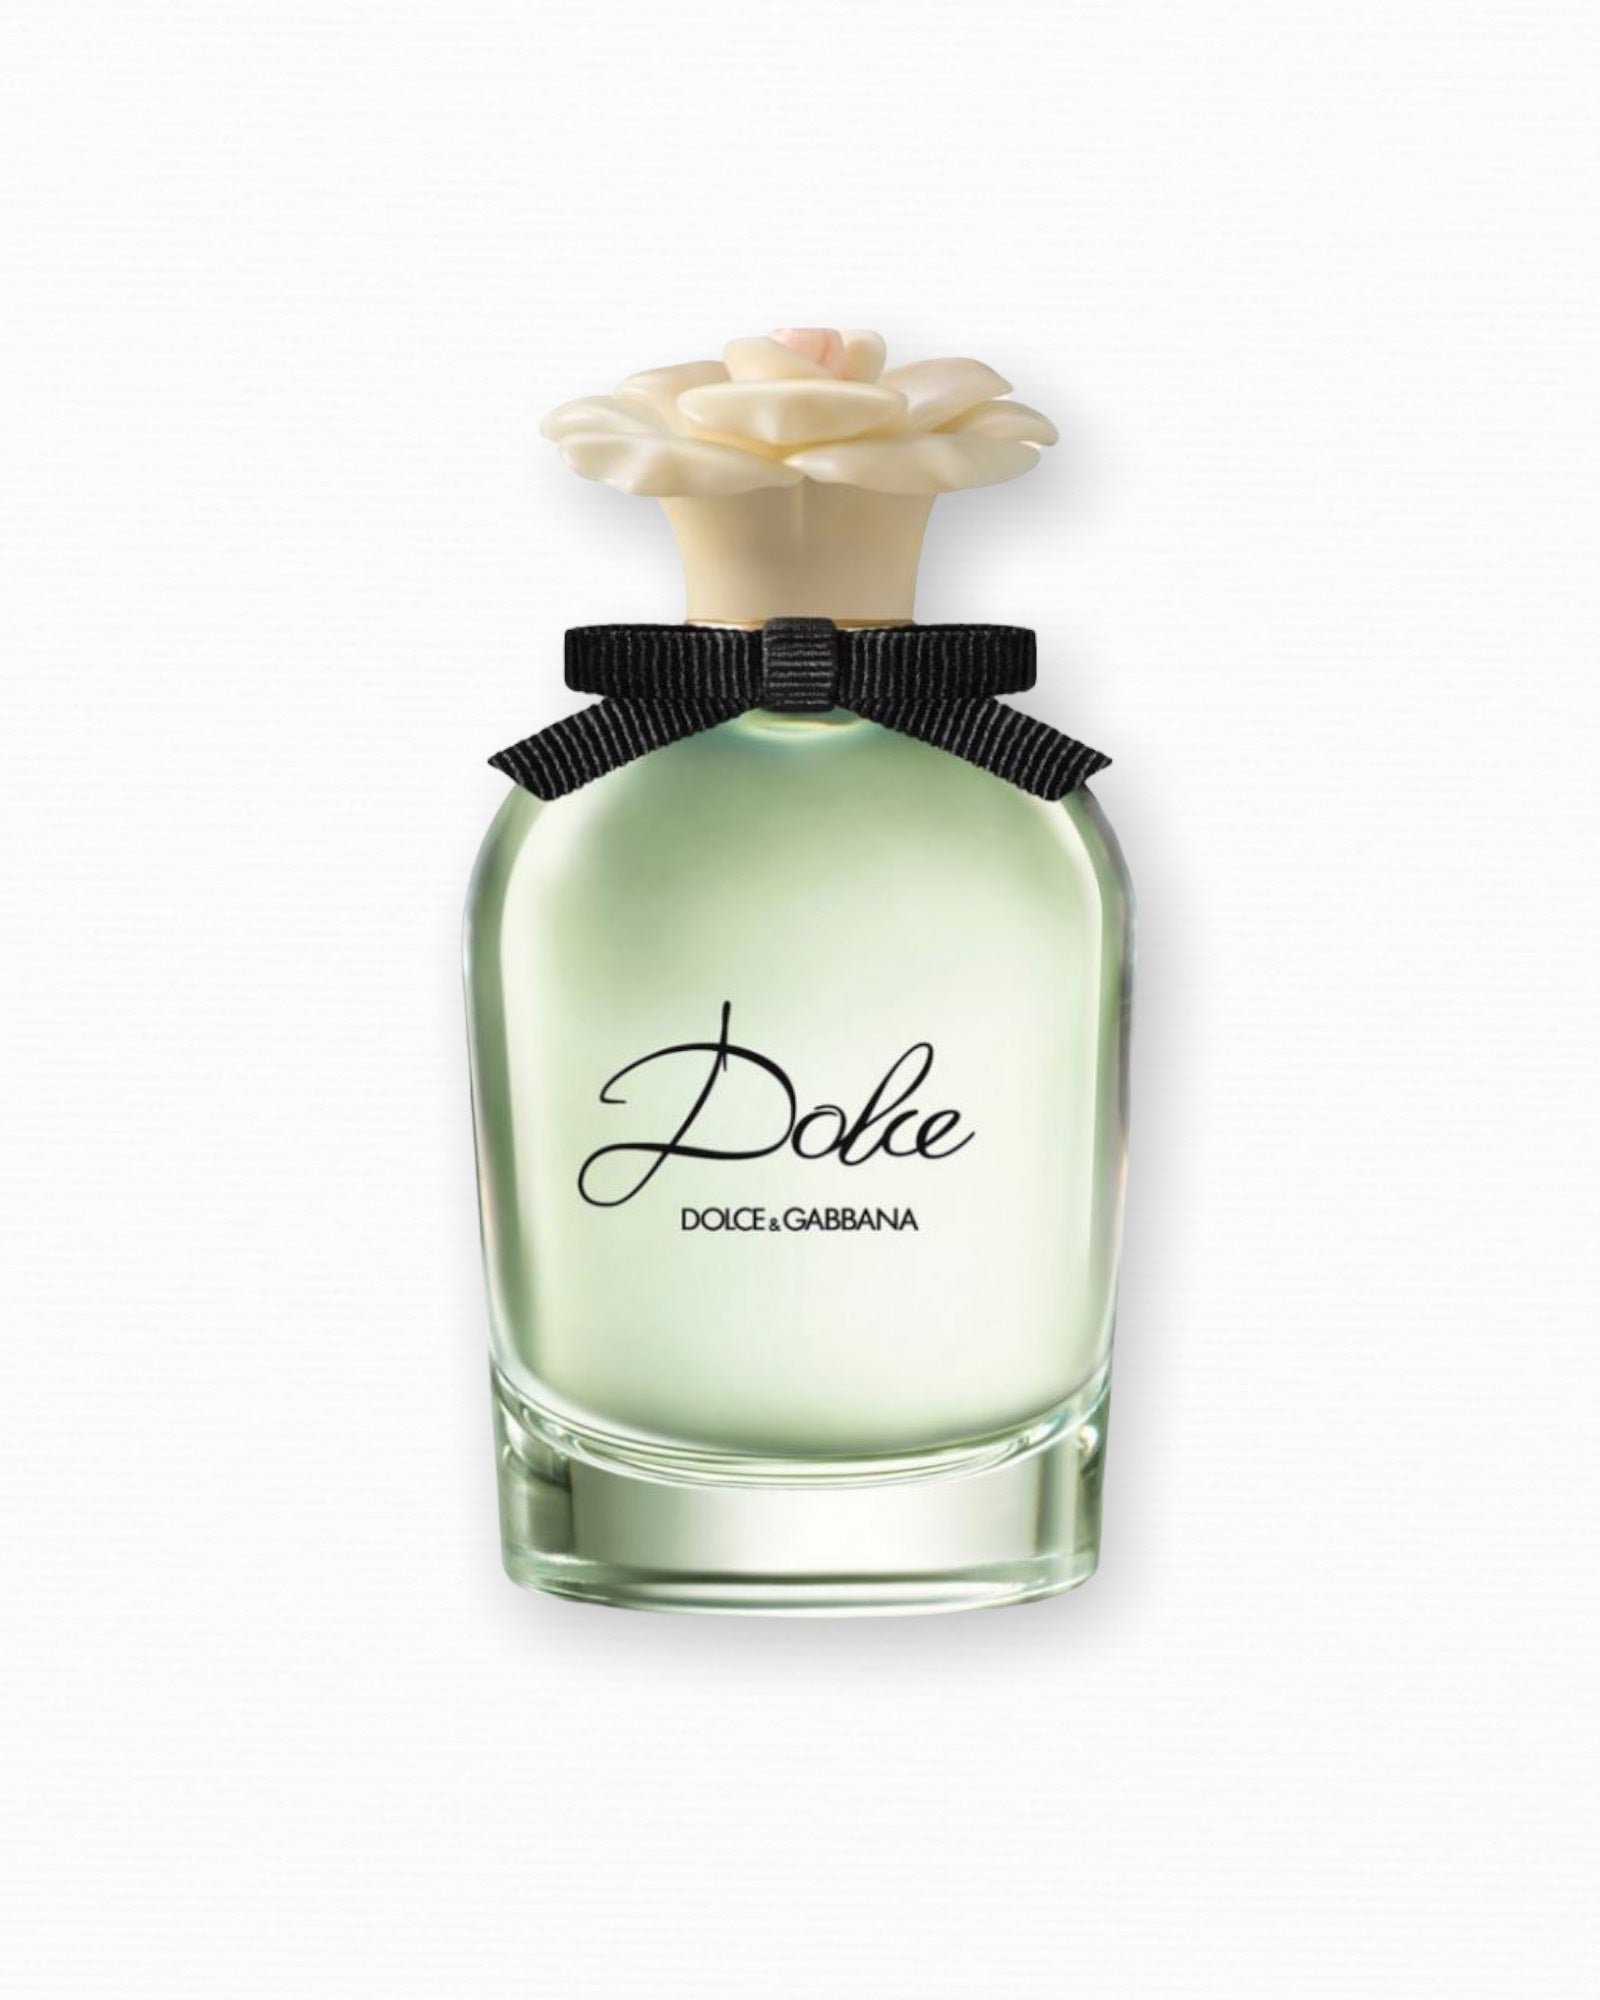 Dolce by Dolce & Gabbana for Women EDT 1.0 oz